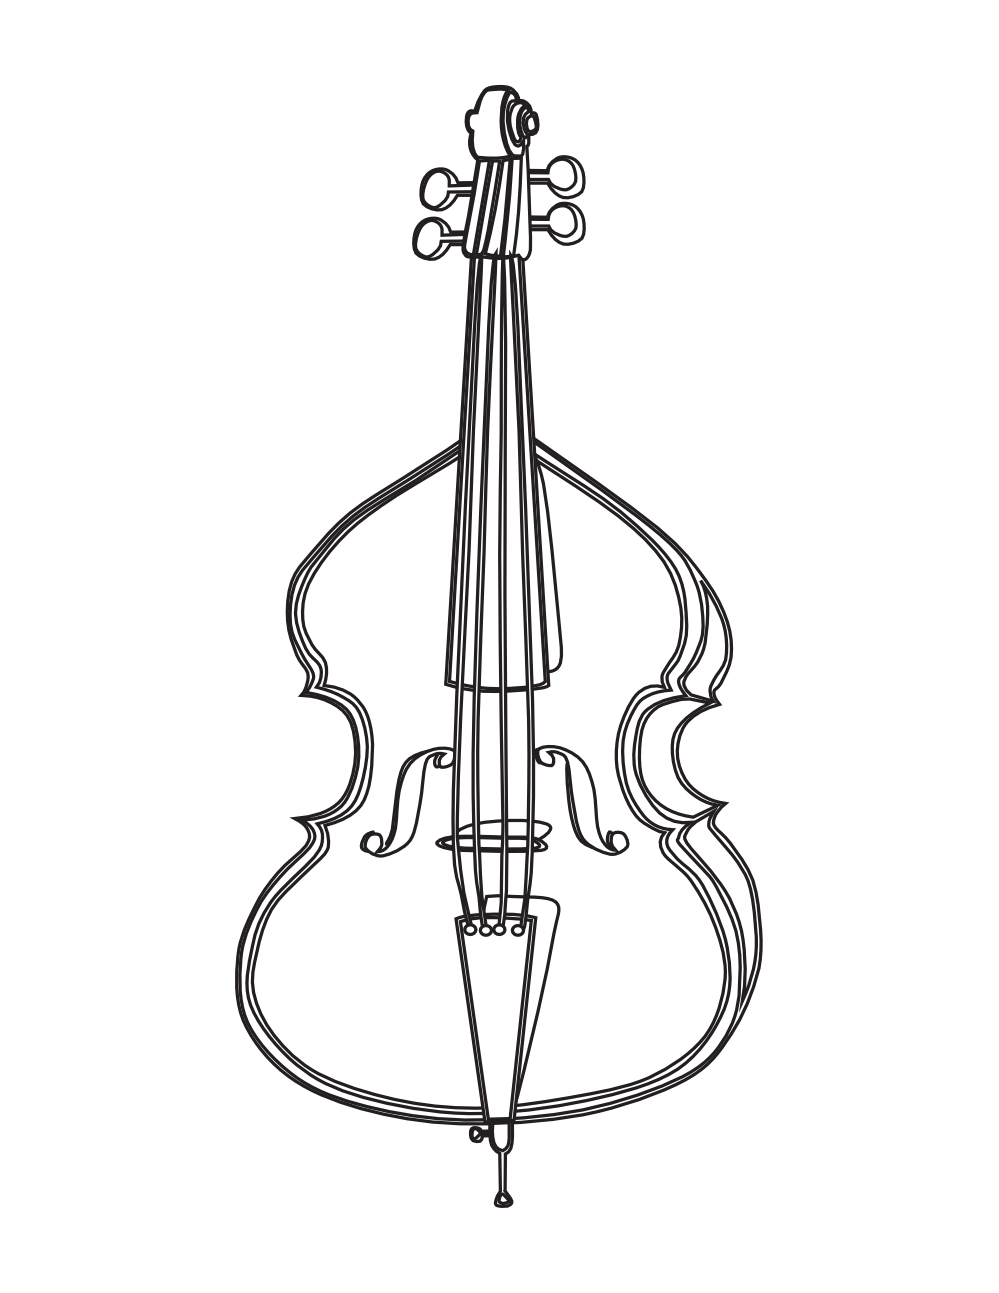 Instruments clipart string.